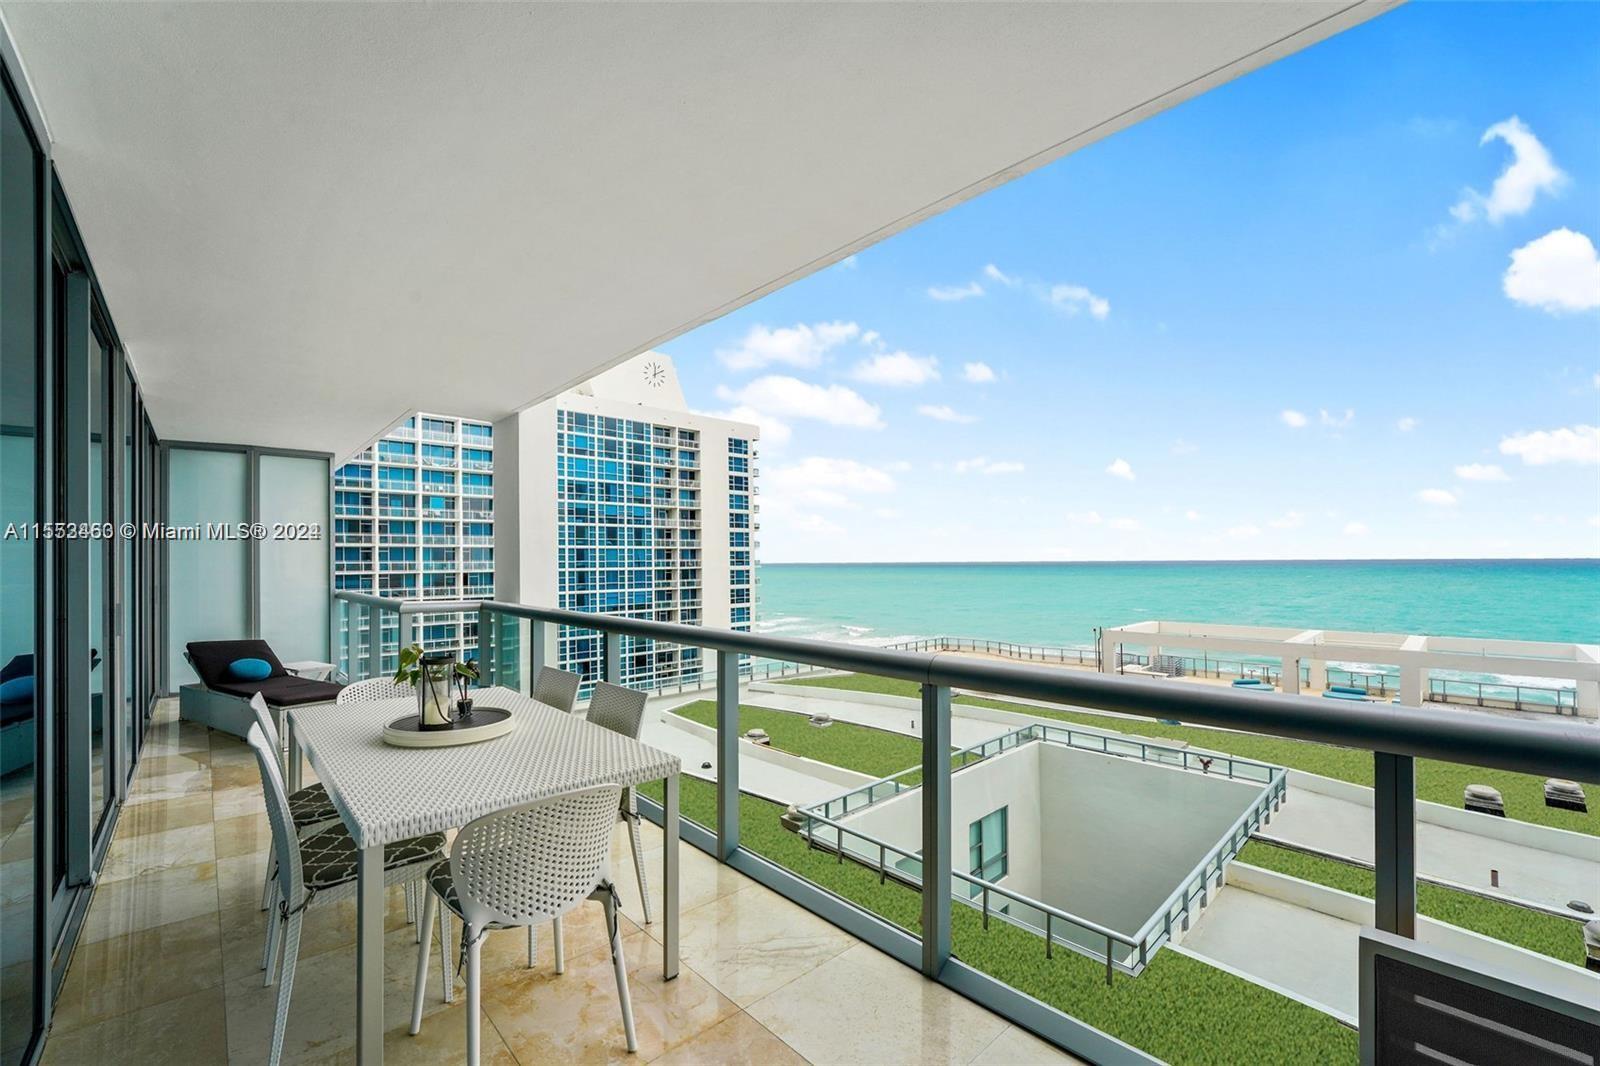 Direct Ocean 2/2. One of LARGEST TERRACES in the building, space for large dining table & more for outdoor/al fresco dining!  All white Miele & Subbzero Appliances.100’s of classes per/ week, 70k+ annually in Spa/ Club Benefits. 70,000 SF Gym, Hydrotherapy, 4 Pools, 2 Pilates Studios, Michelin Star Pop up Restaurant, Juice Bar, Rock Climbing Wall, Private Beach. Text for more info.